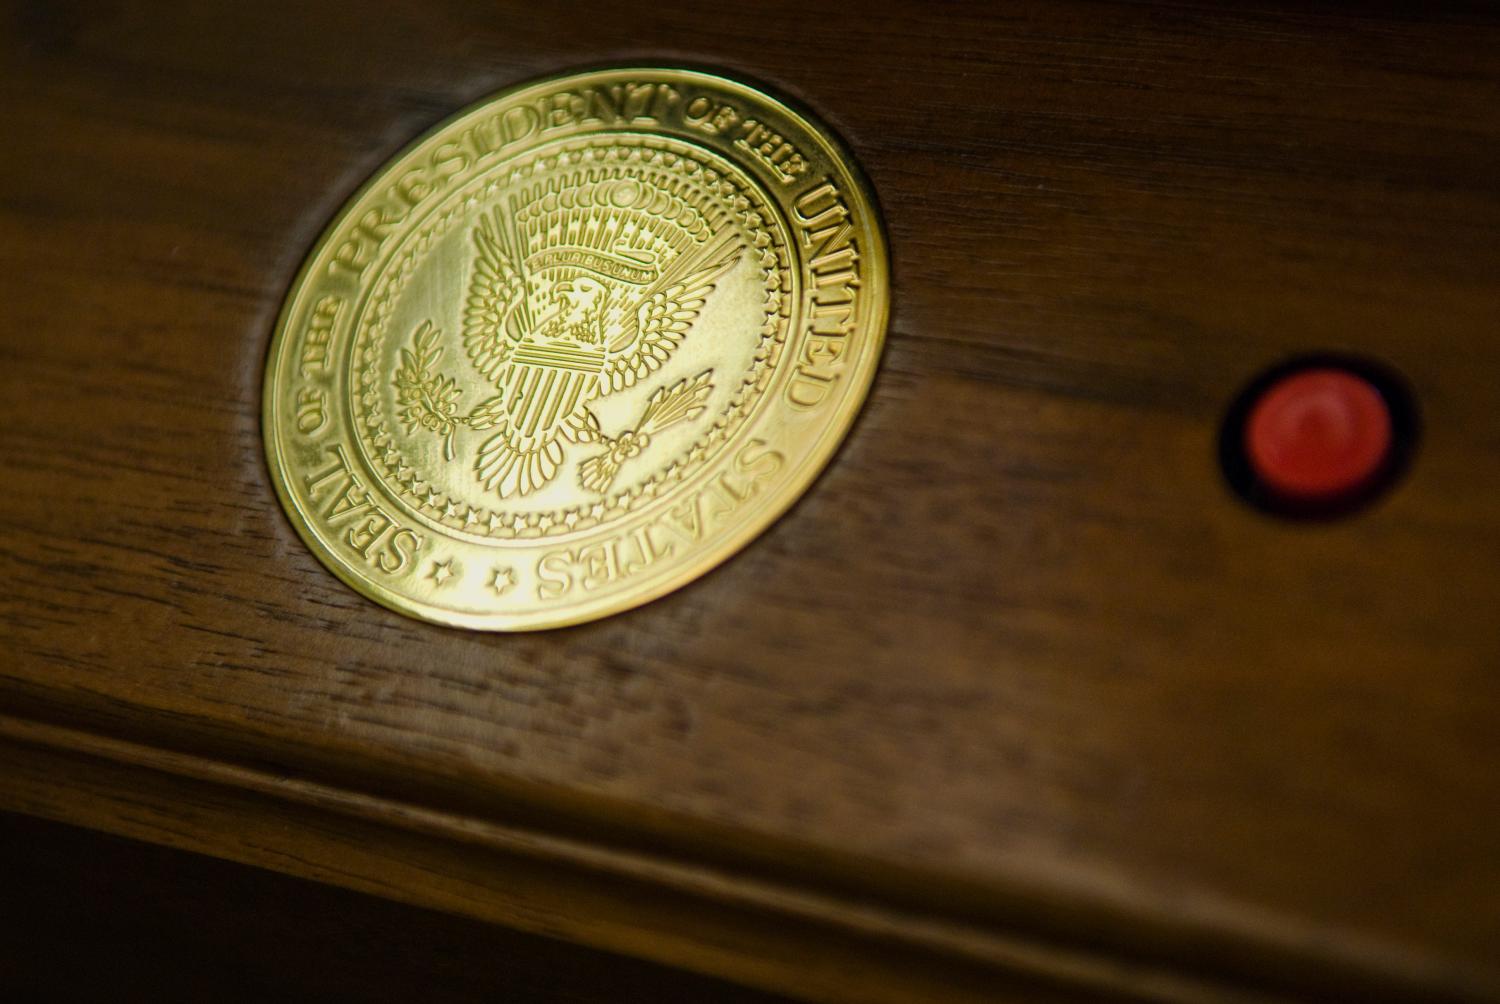 A call button bearing the seal of the president sits on a table in the Oval Office at the White House in Washington February 29, 2008. The current West Wing office of the president of the United States, constructed in the shape of an approximately 11m by 9m oval in 1934, sports a woven wool rug with the presidential seal. REUTERS/Jonathan Ernst